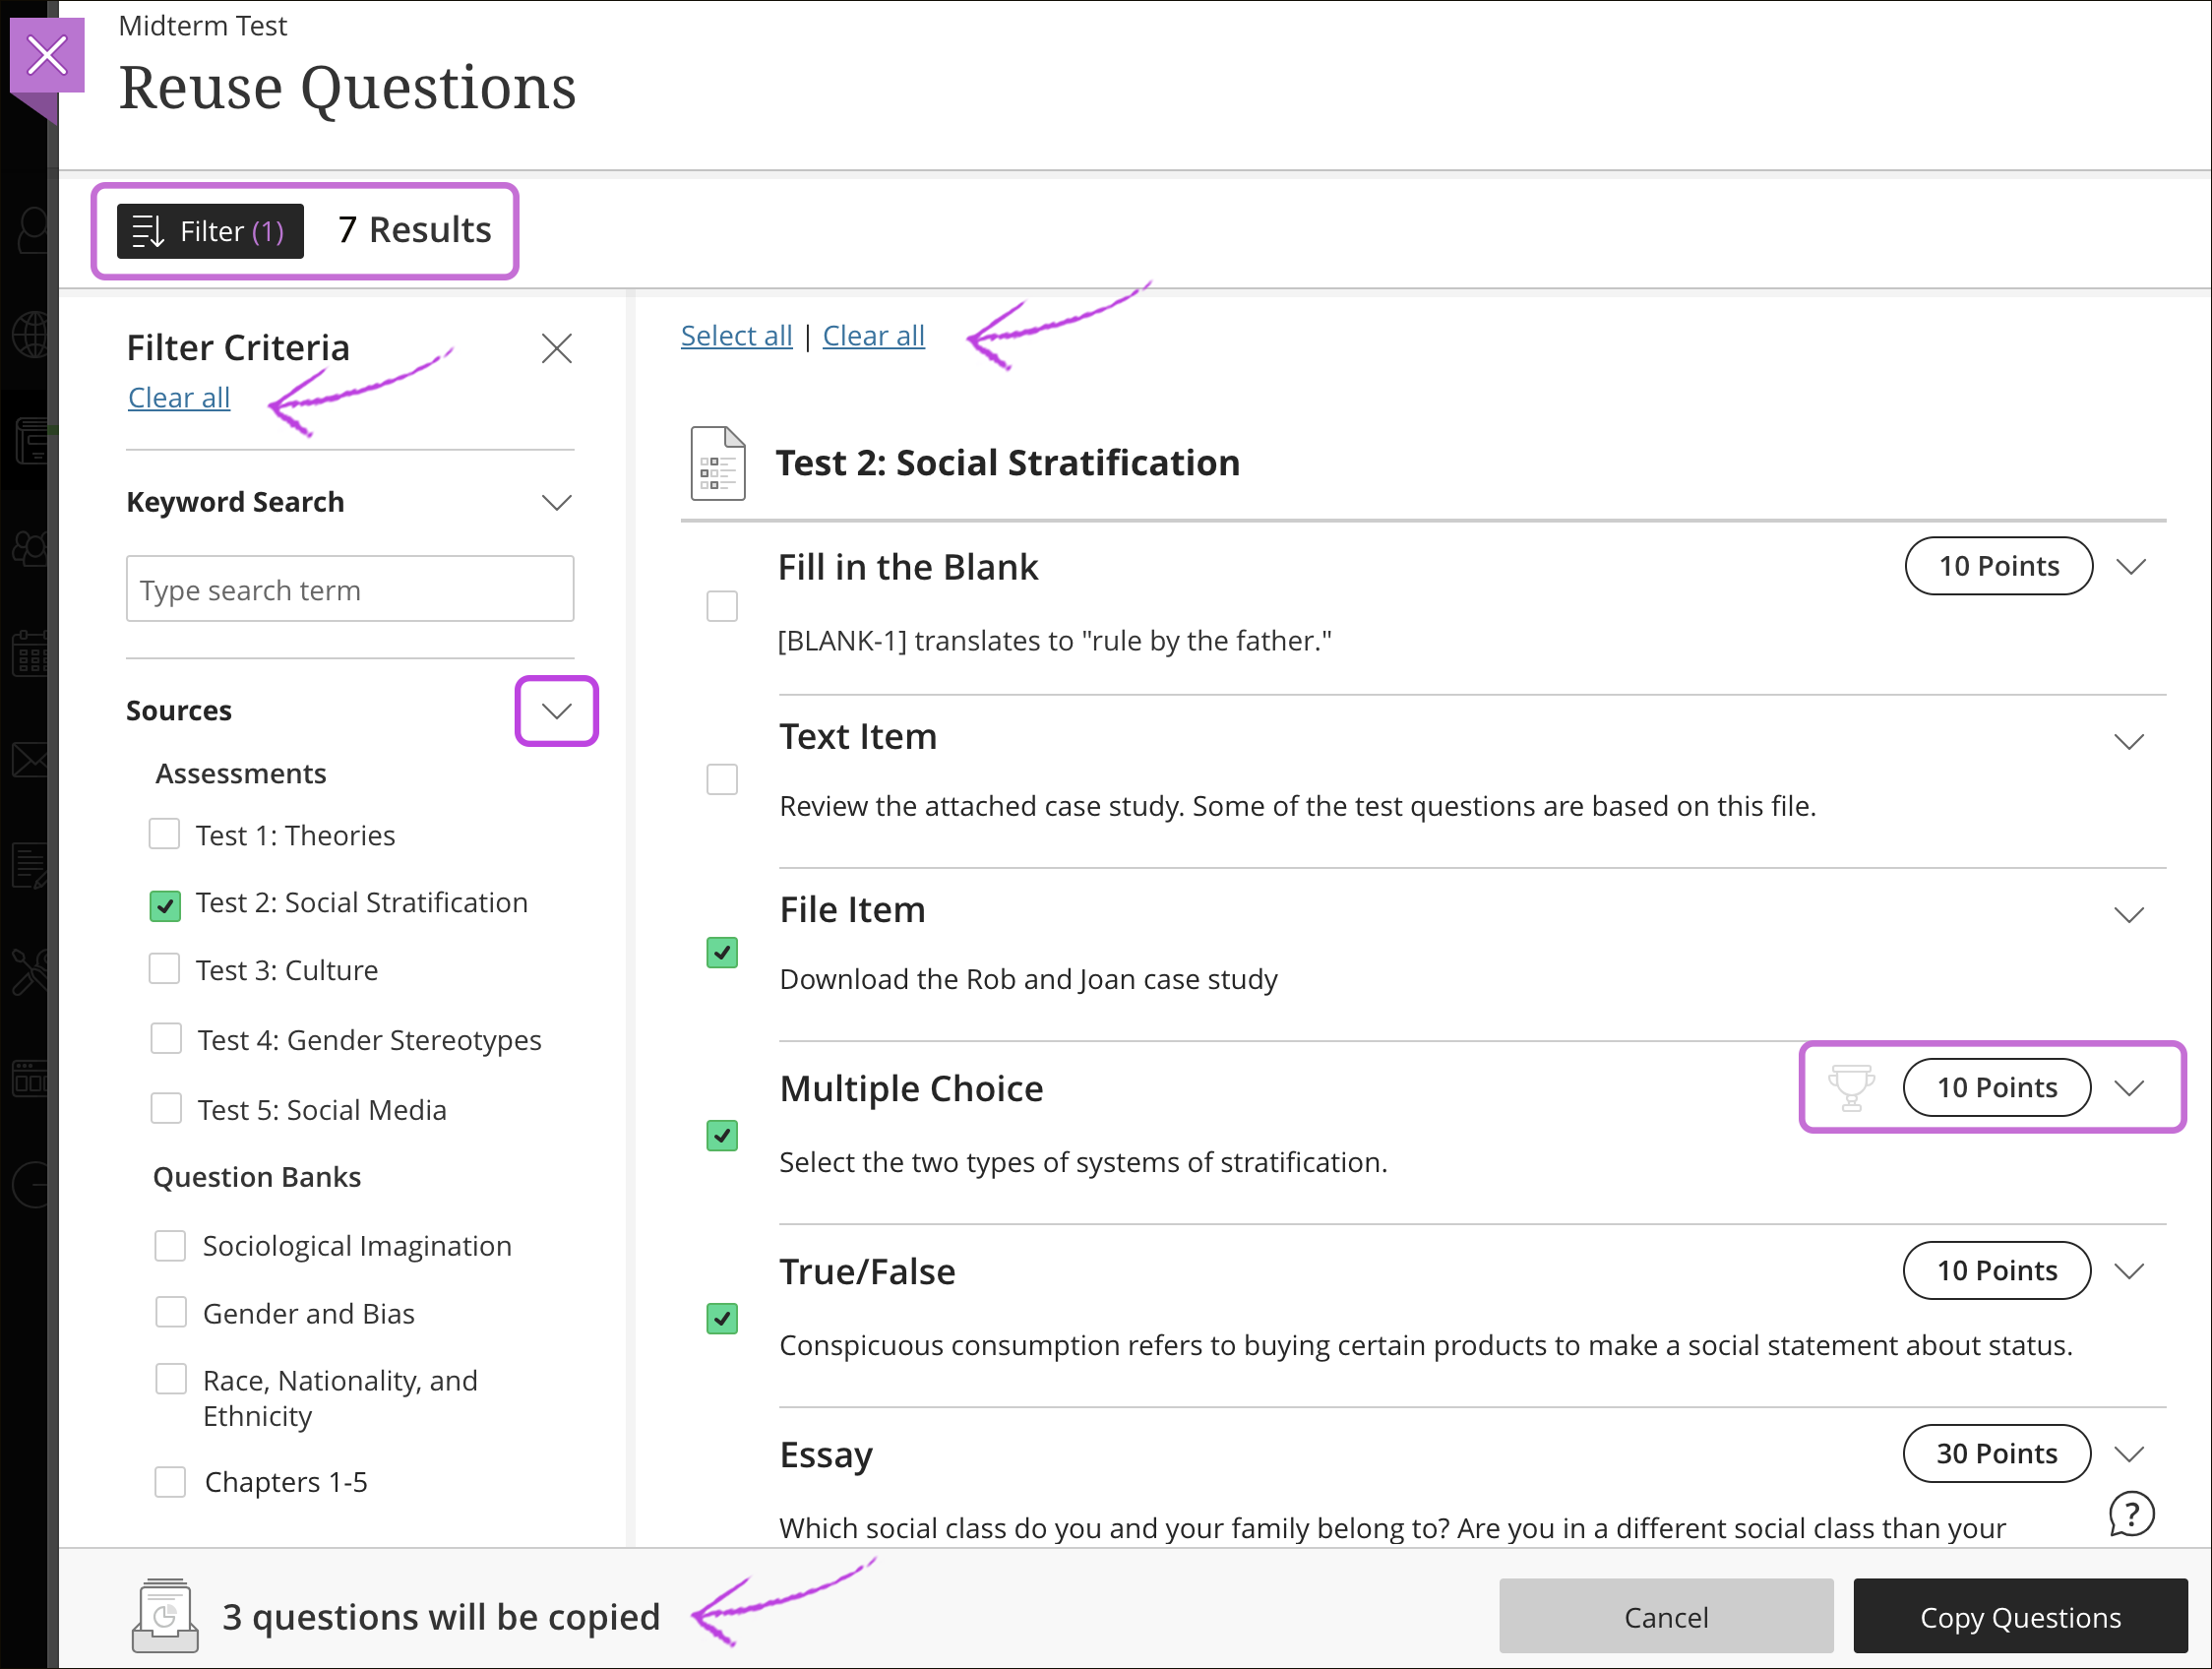 Reuse questions filter panel open highlighting the clear all option.